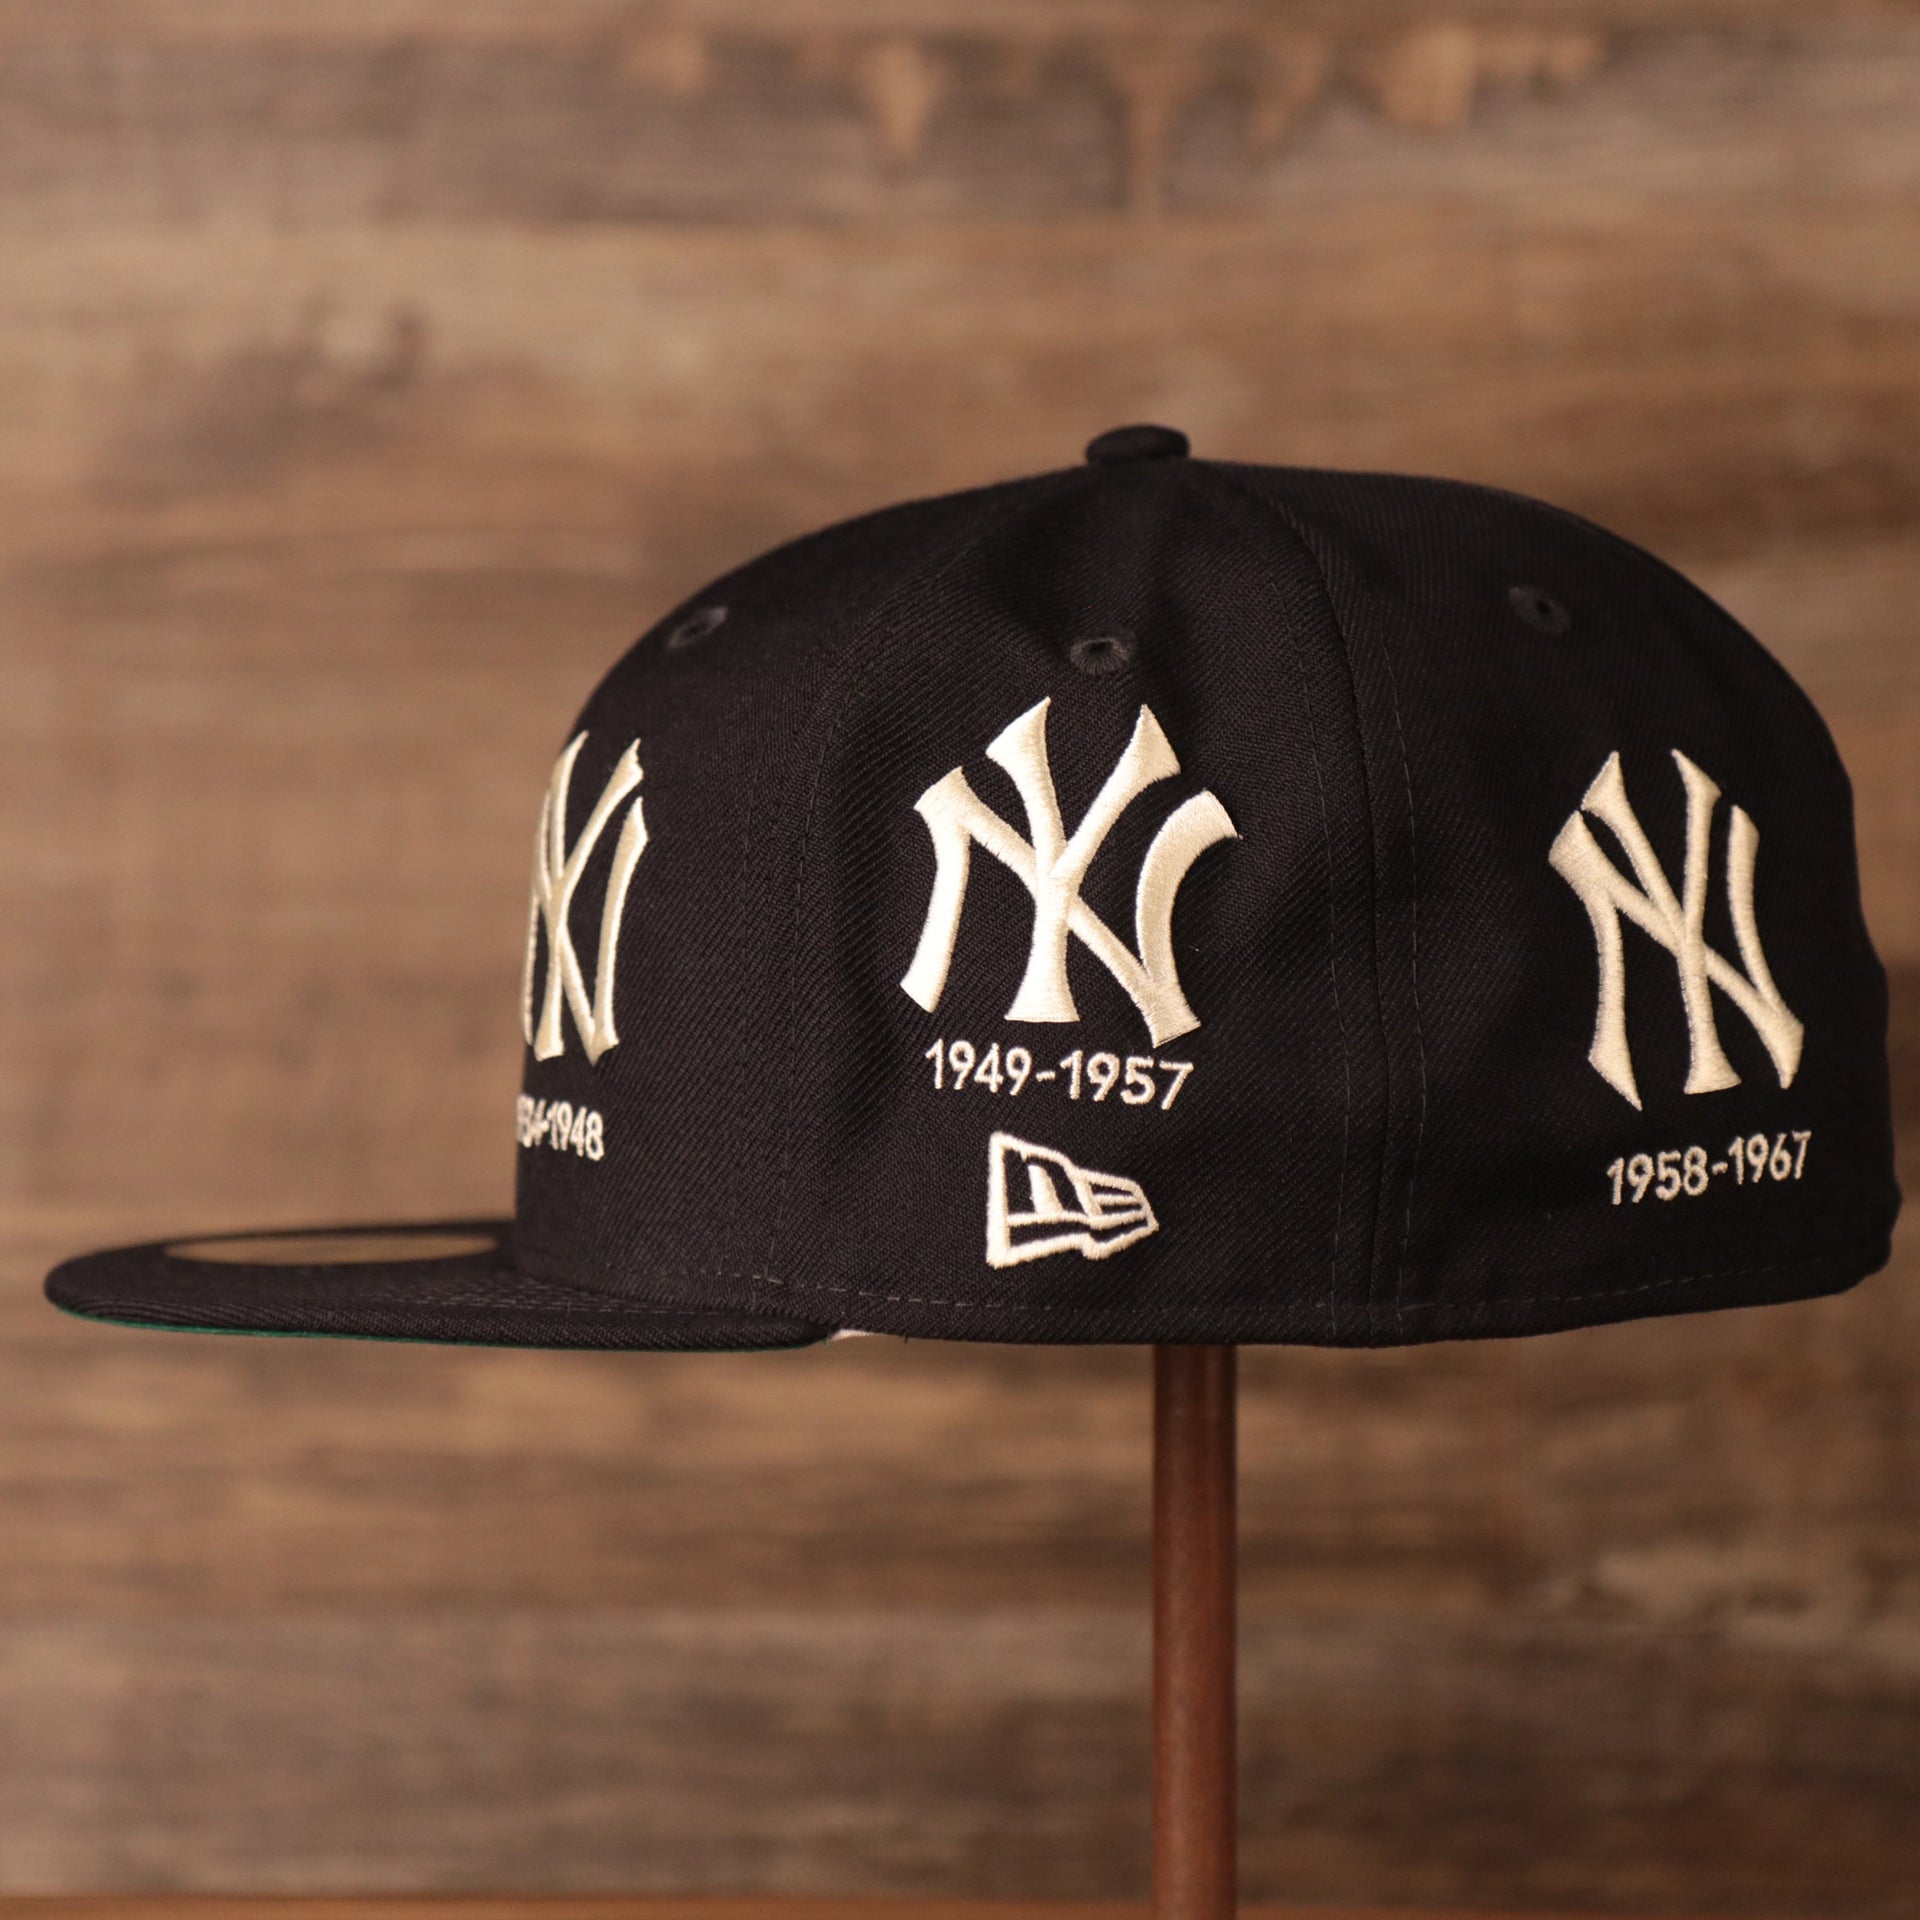 Old school 59fifty by New Era with the retro logos of the New York Yankees.